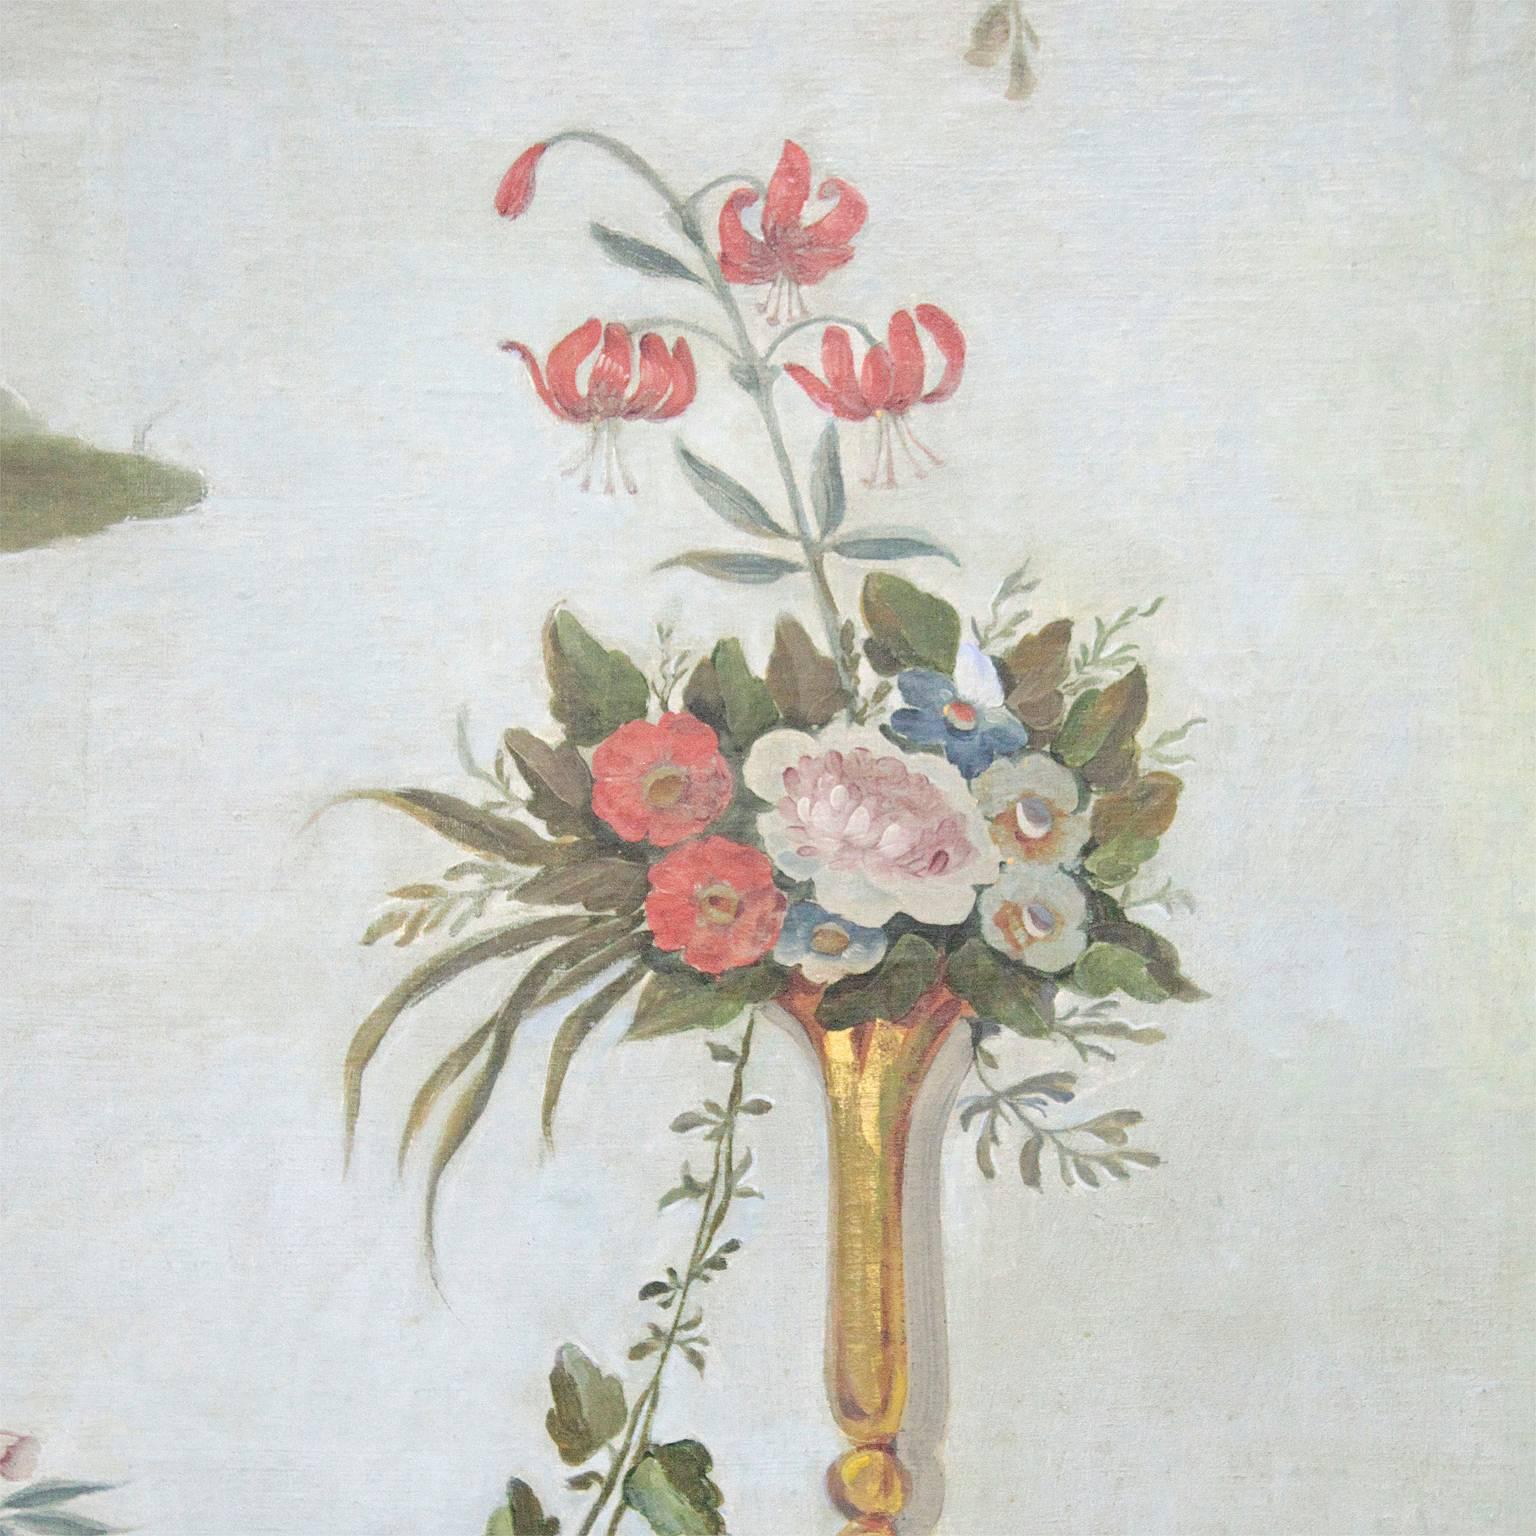 Polychrome chinoiserie oil painting on canvas, depicting people on a boat in front of a Chinese-style garden scene, surrounded by flower garlands and rocaille elements.